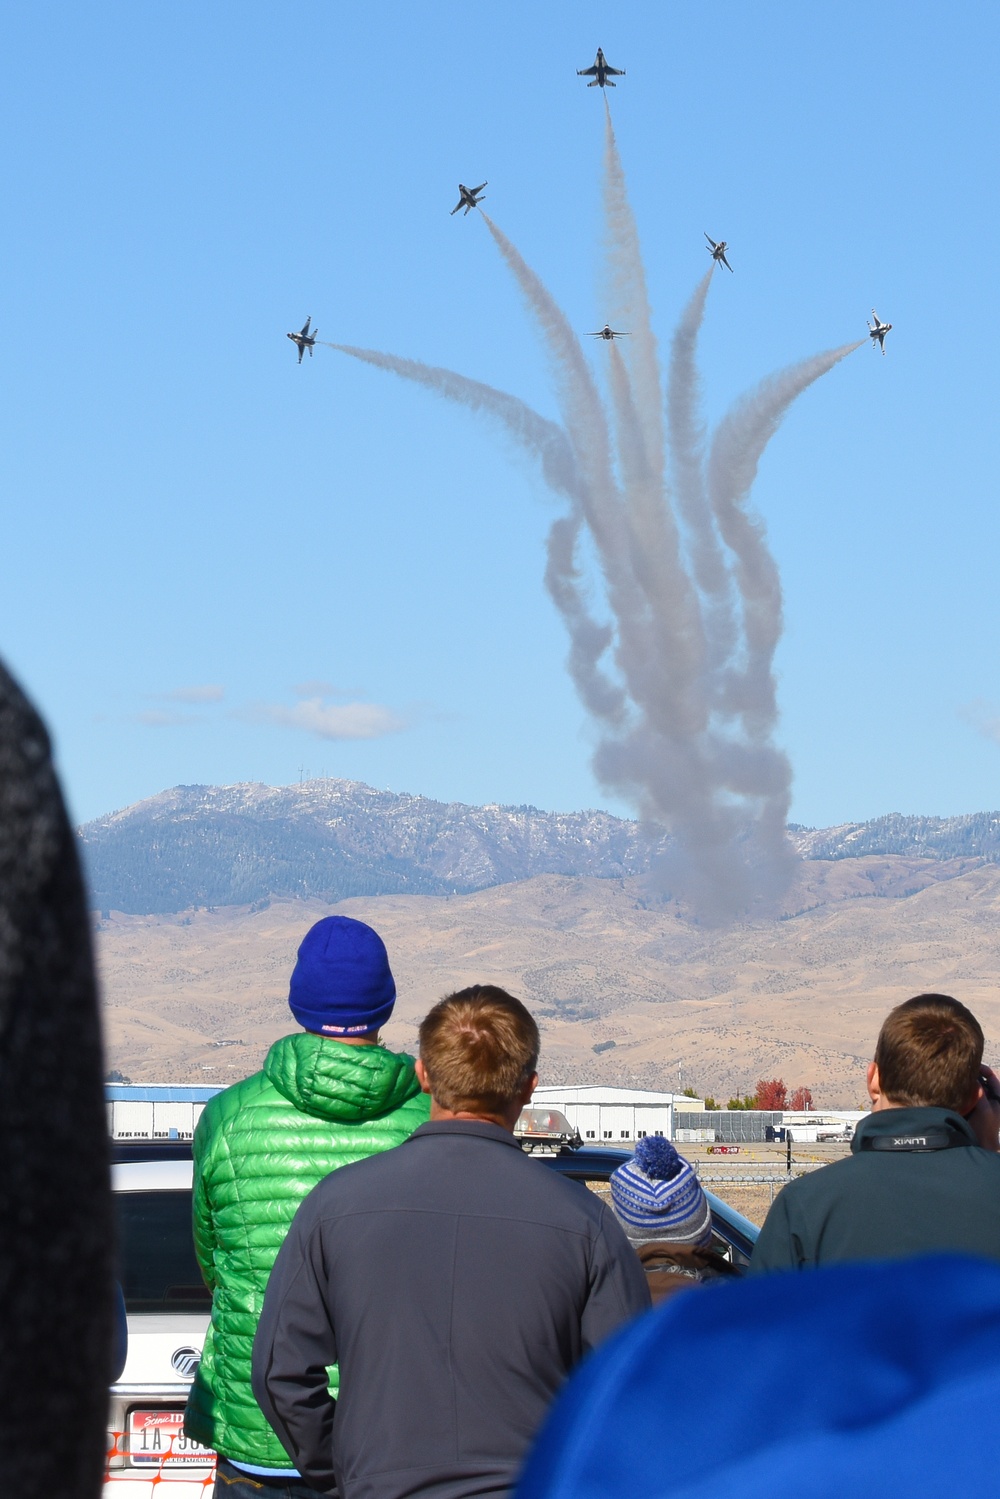 Gowen Thunder open house and air show in Idaho